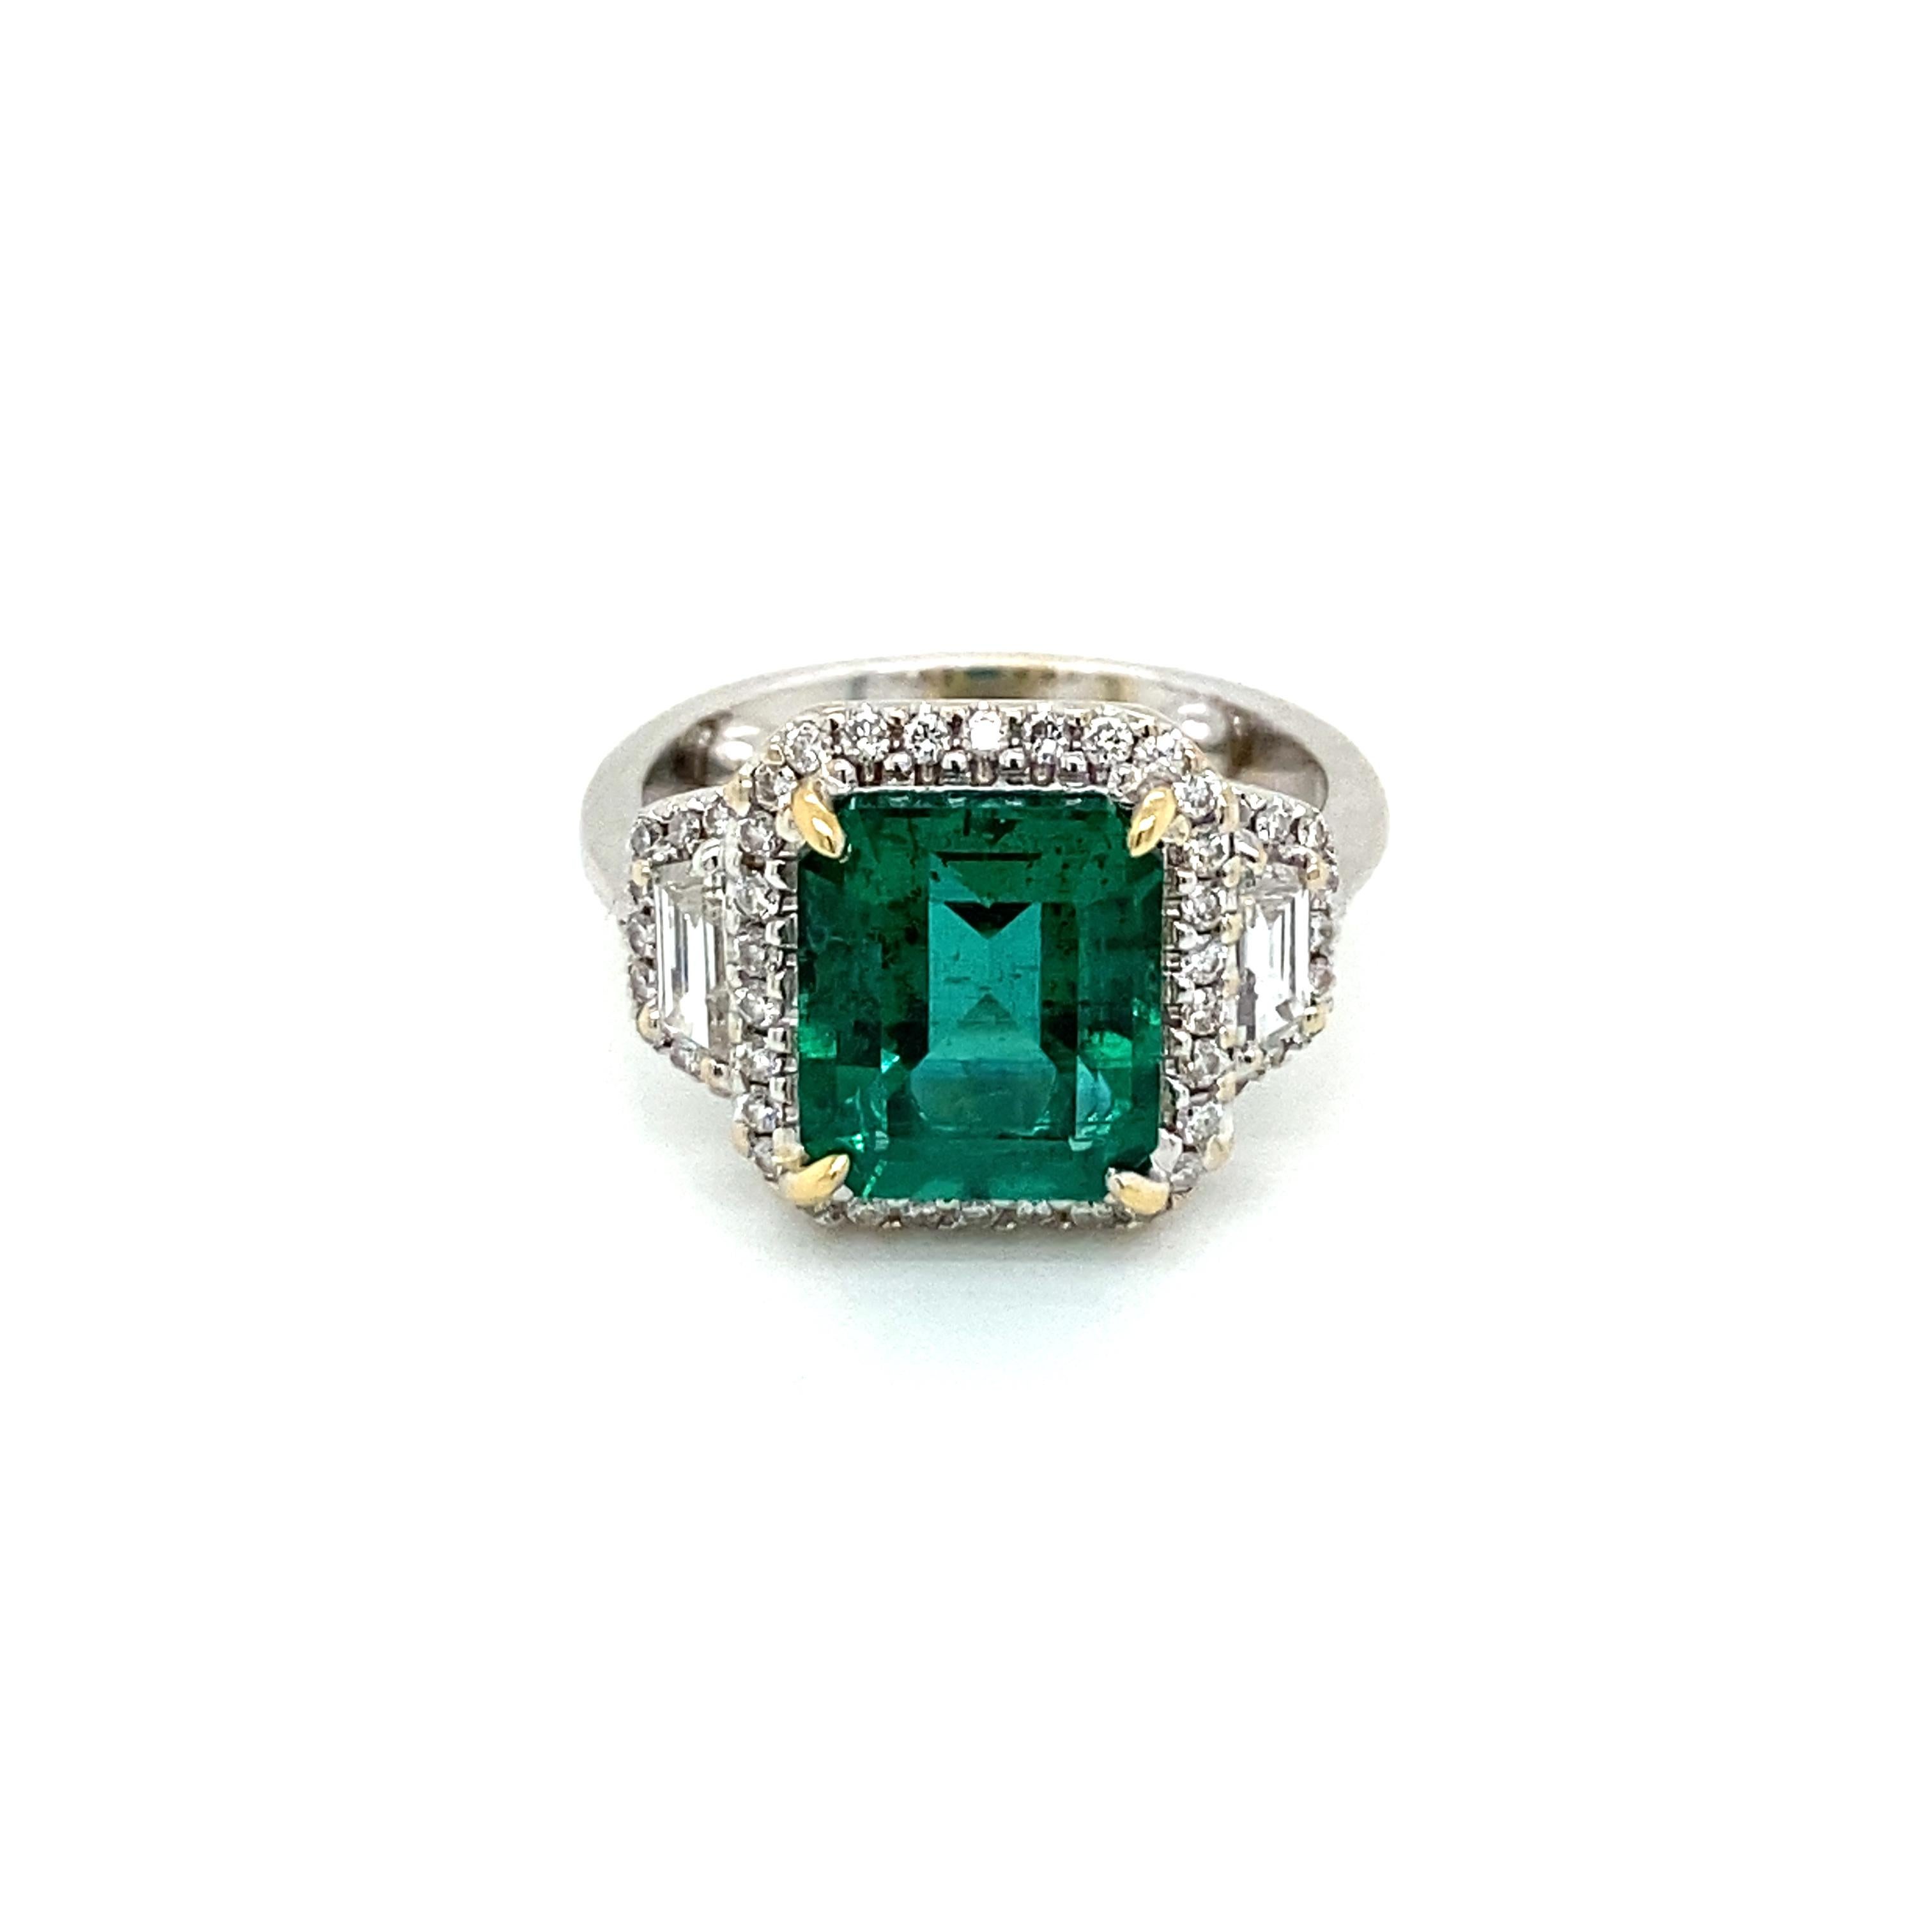 An exquisite ring set in 18k white gold, featuring a Rare vivid 3,34 ct. Emerald-cut Zambian Emerald, surrounded by 2 carats of Sparkling Round and Baguette shape diamonds, graded G color Vvs1 clarity.

The Emerald color is graded Intense bluish